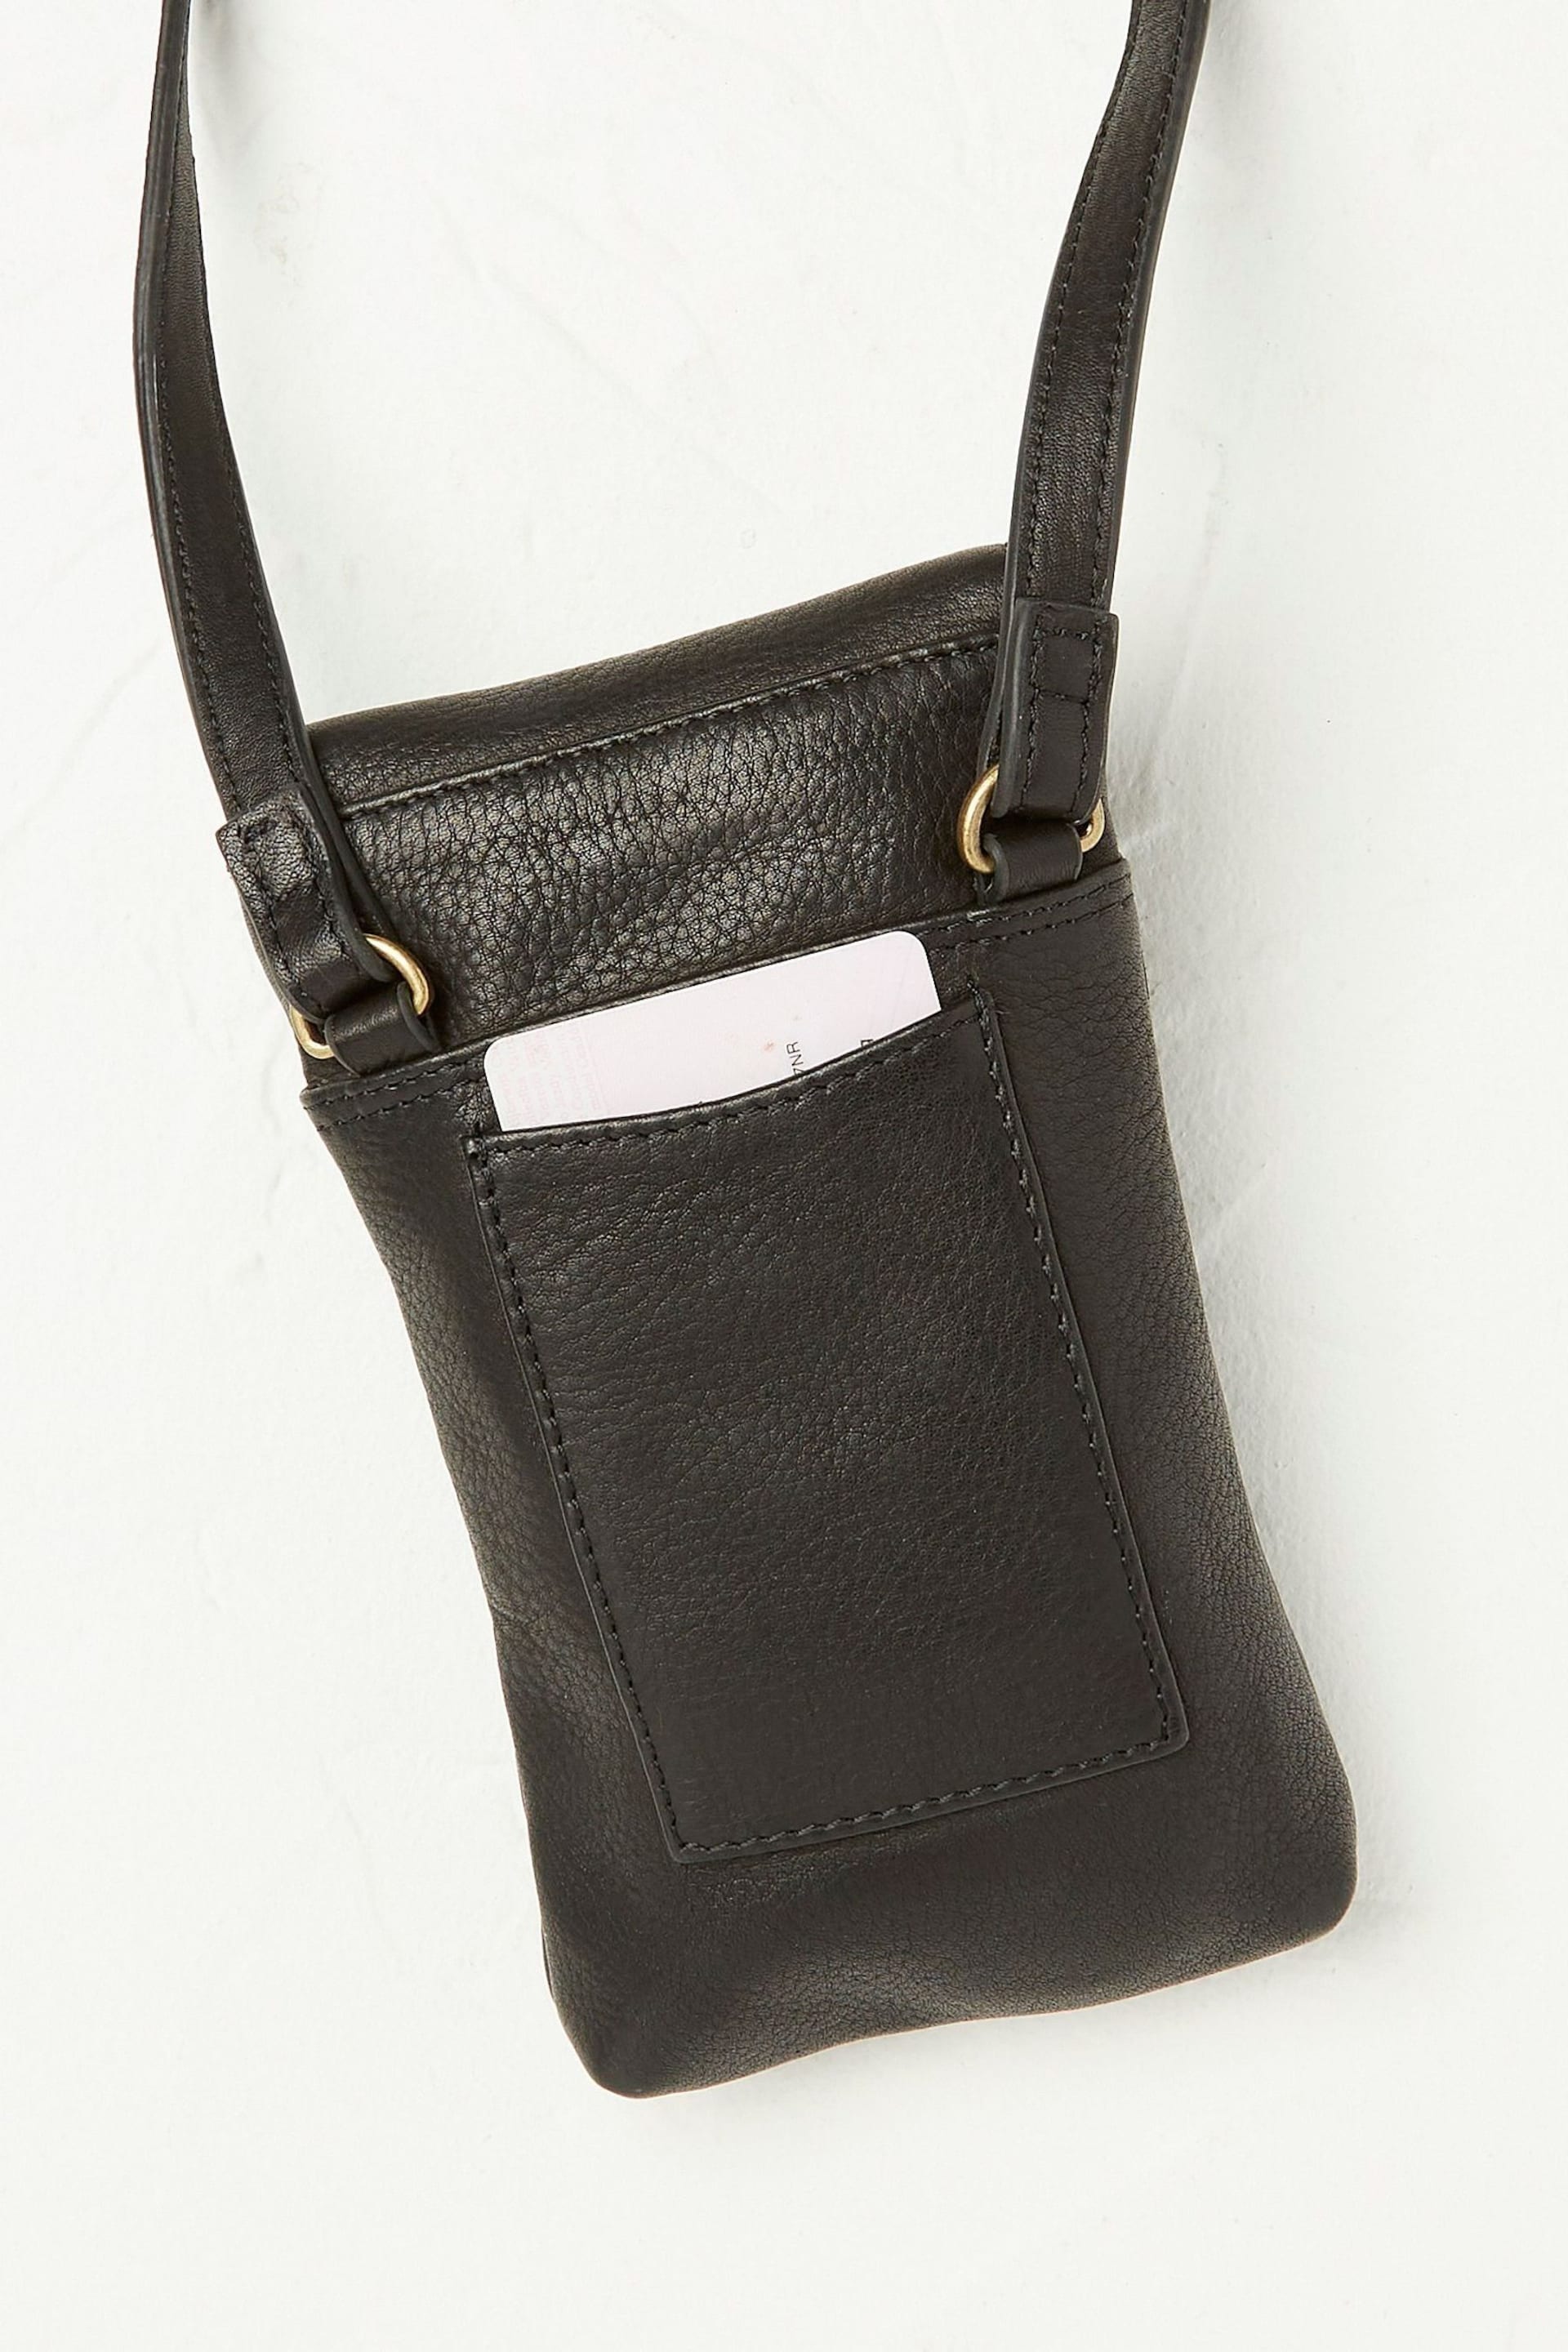 FatFace Black Bronte Bee Phone Bag - Image 3 of 4